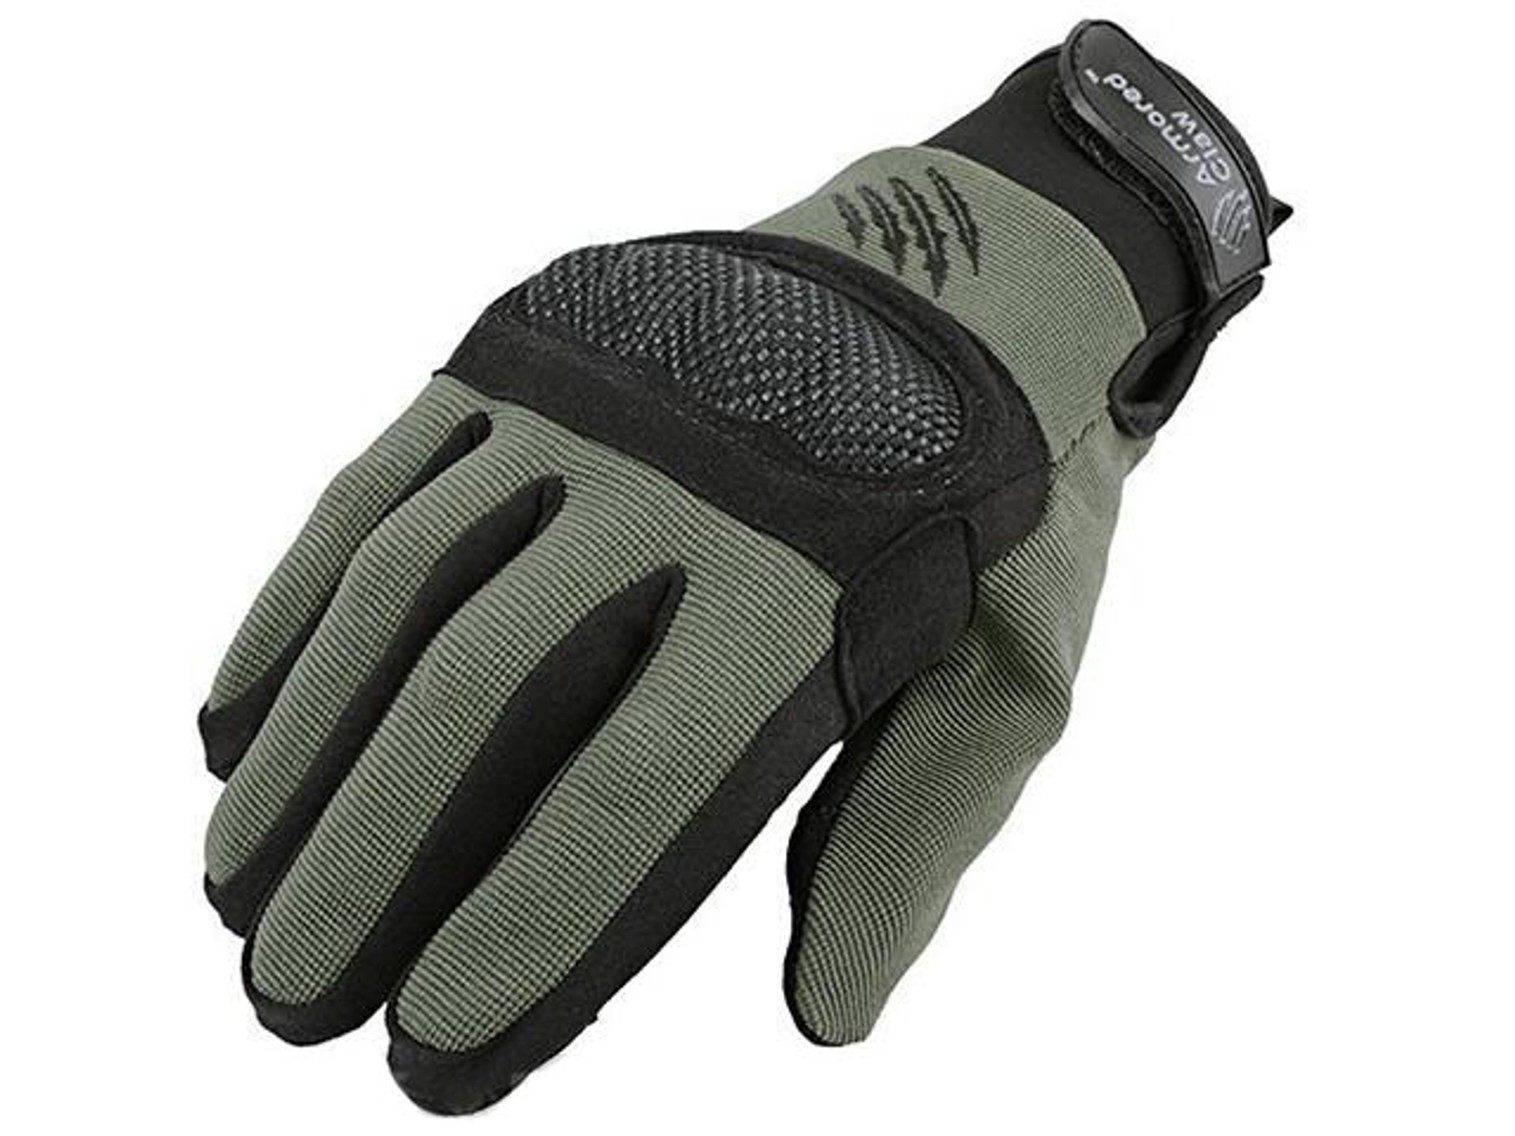 Armored Claw "Shield" Tactical Glove (Color: Sage / Small)